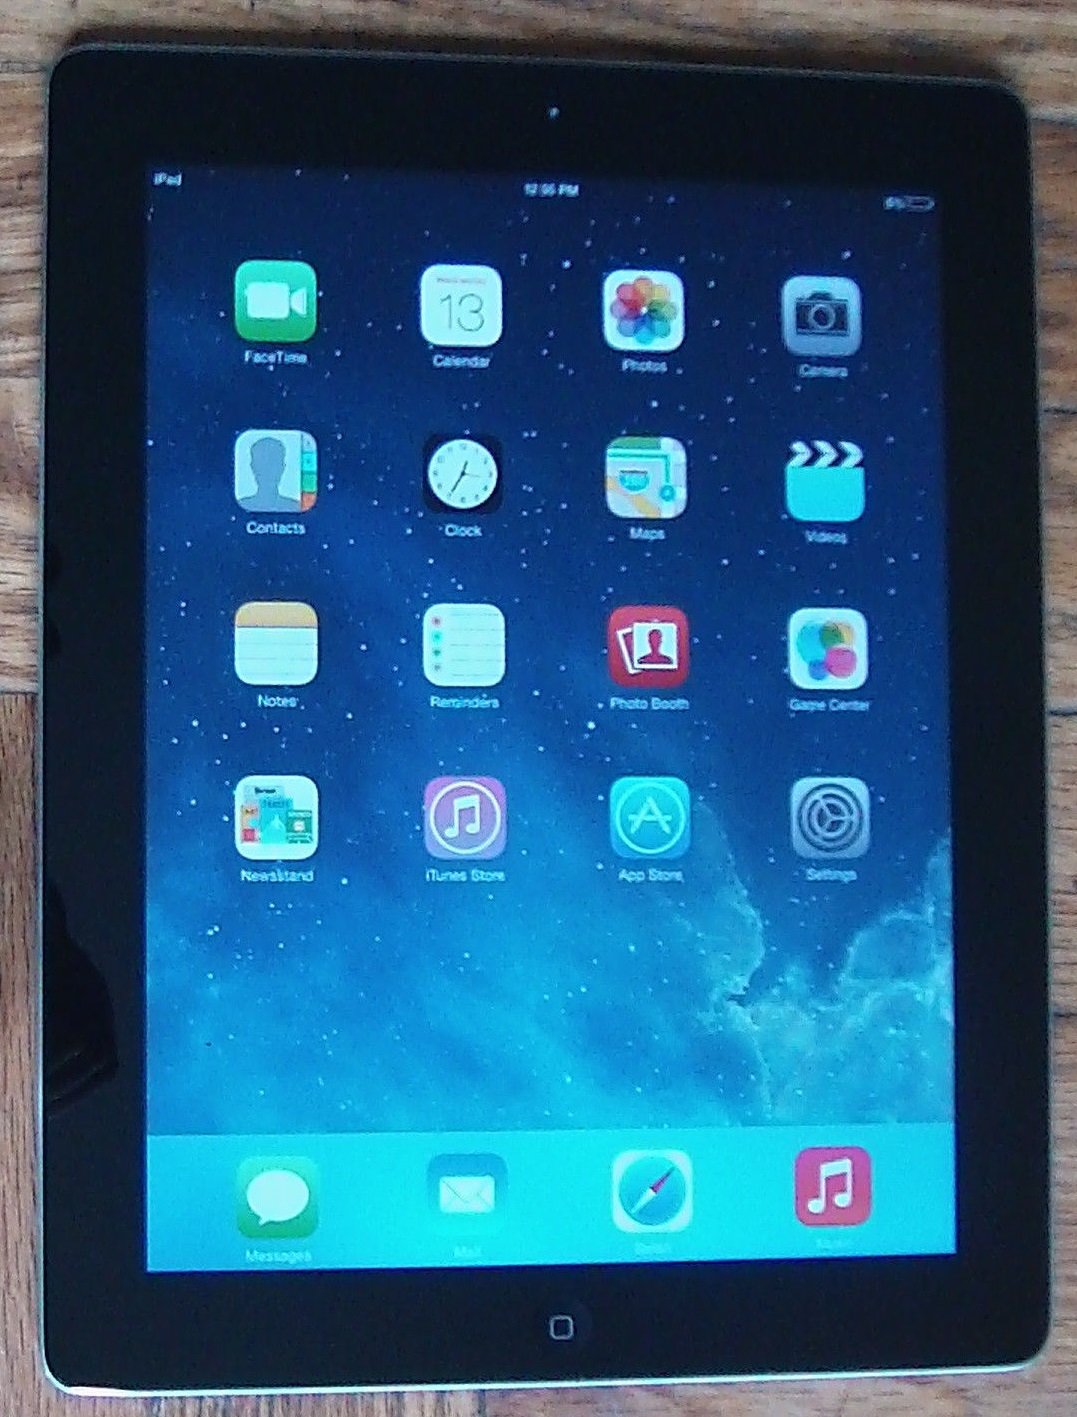 iPad2 3G +Wifi 64GB, Unlocked, No Charger Included, Appears to Function